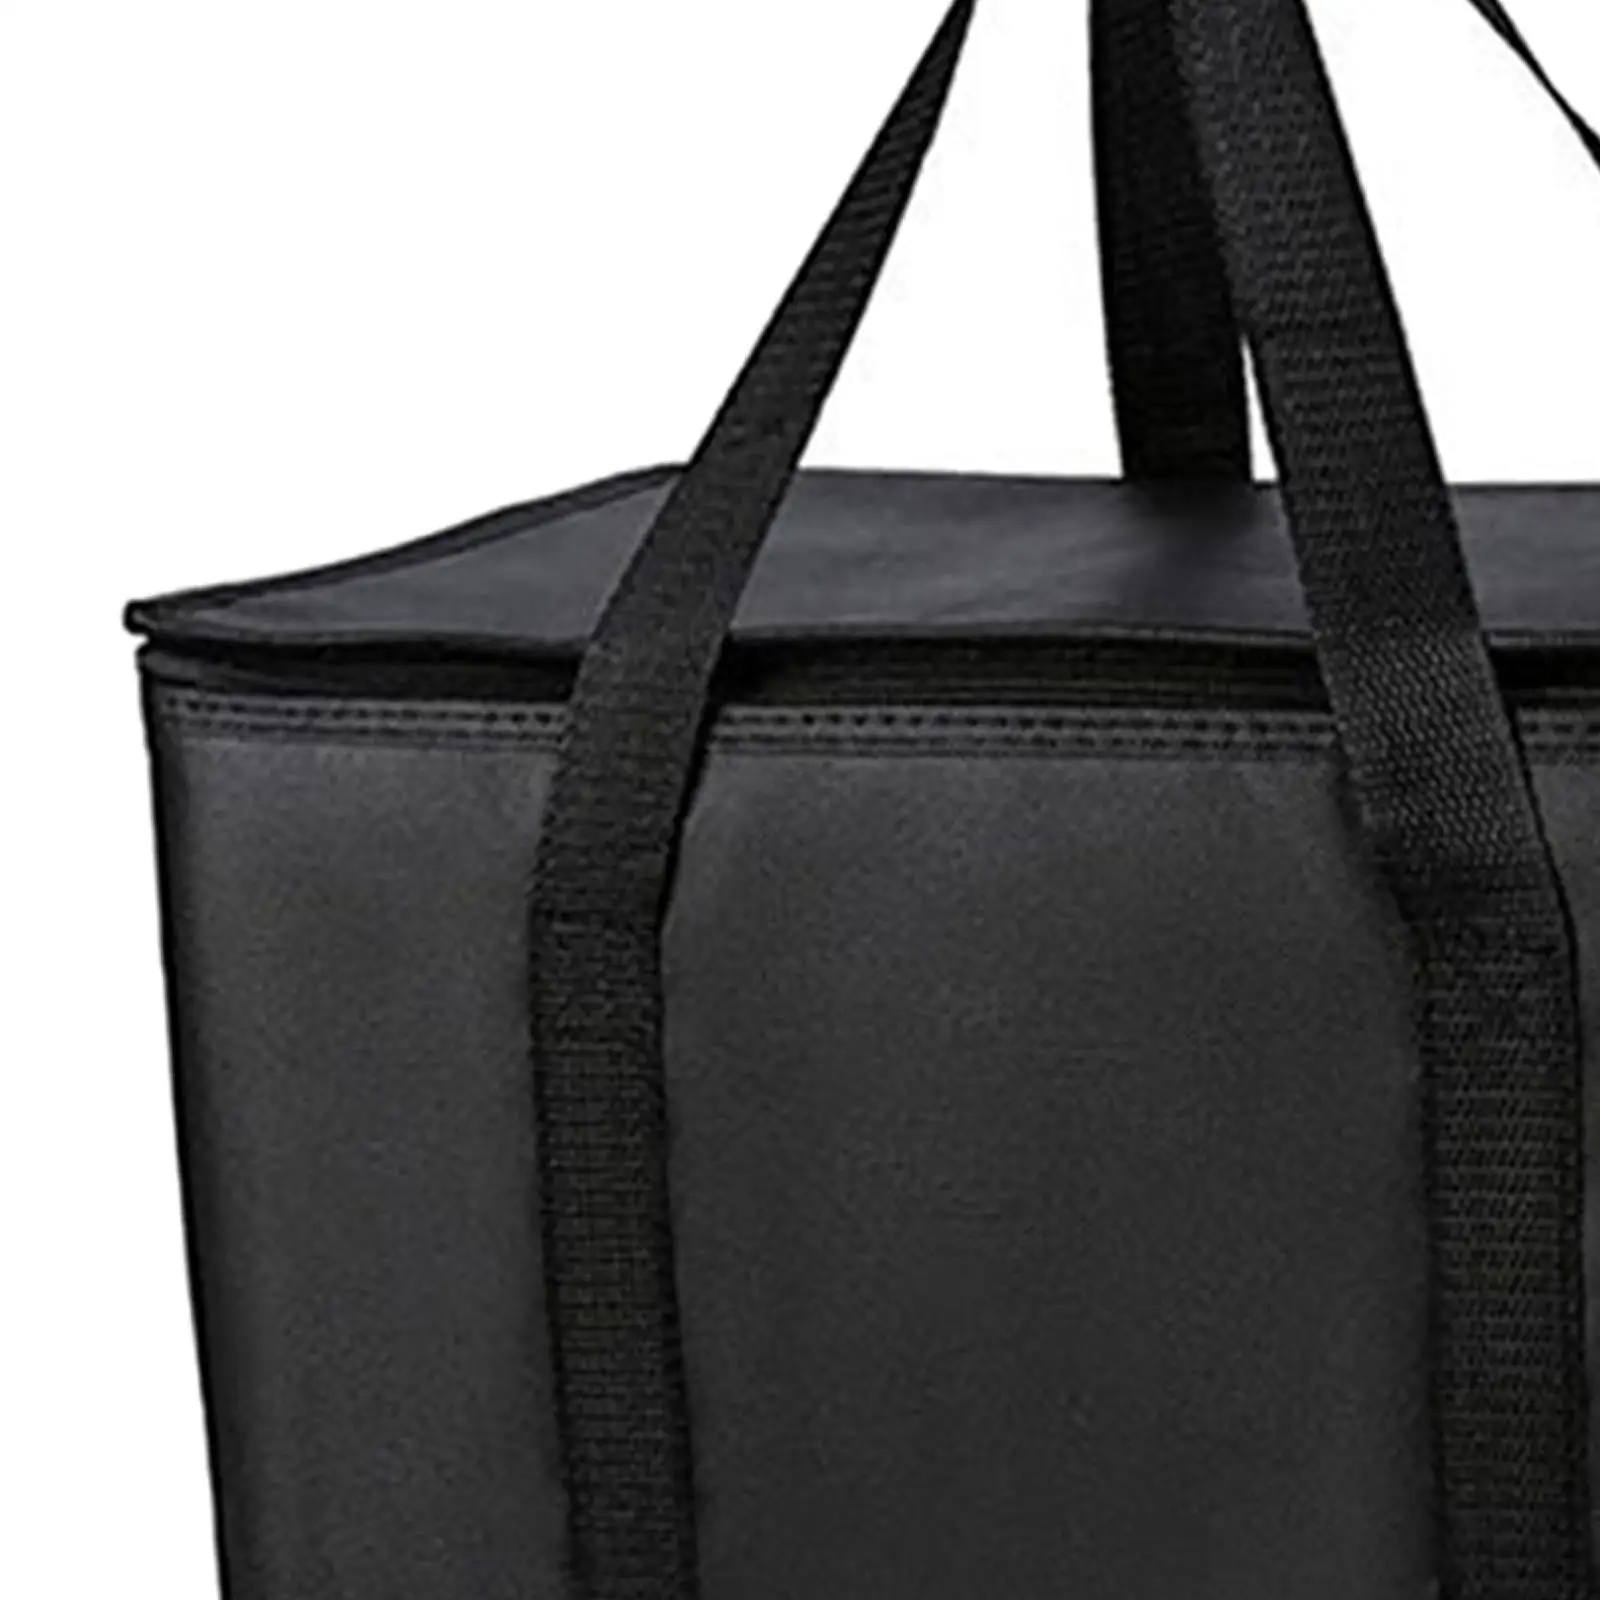 Bento Tote Bags Reusable Tote Bag Container Case Zipper Beach Bags Insulated Bag for Beach Office Traveling Hot or Cold Outdoor